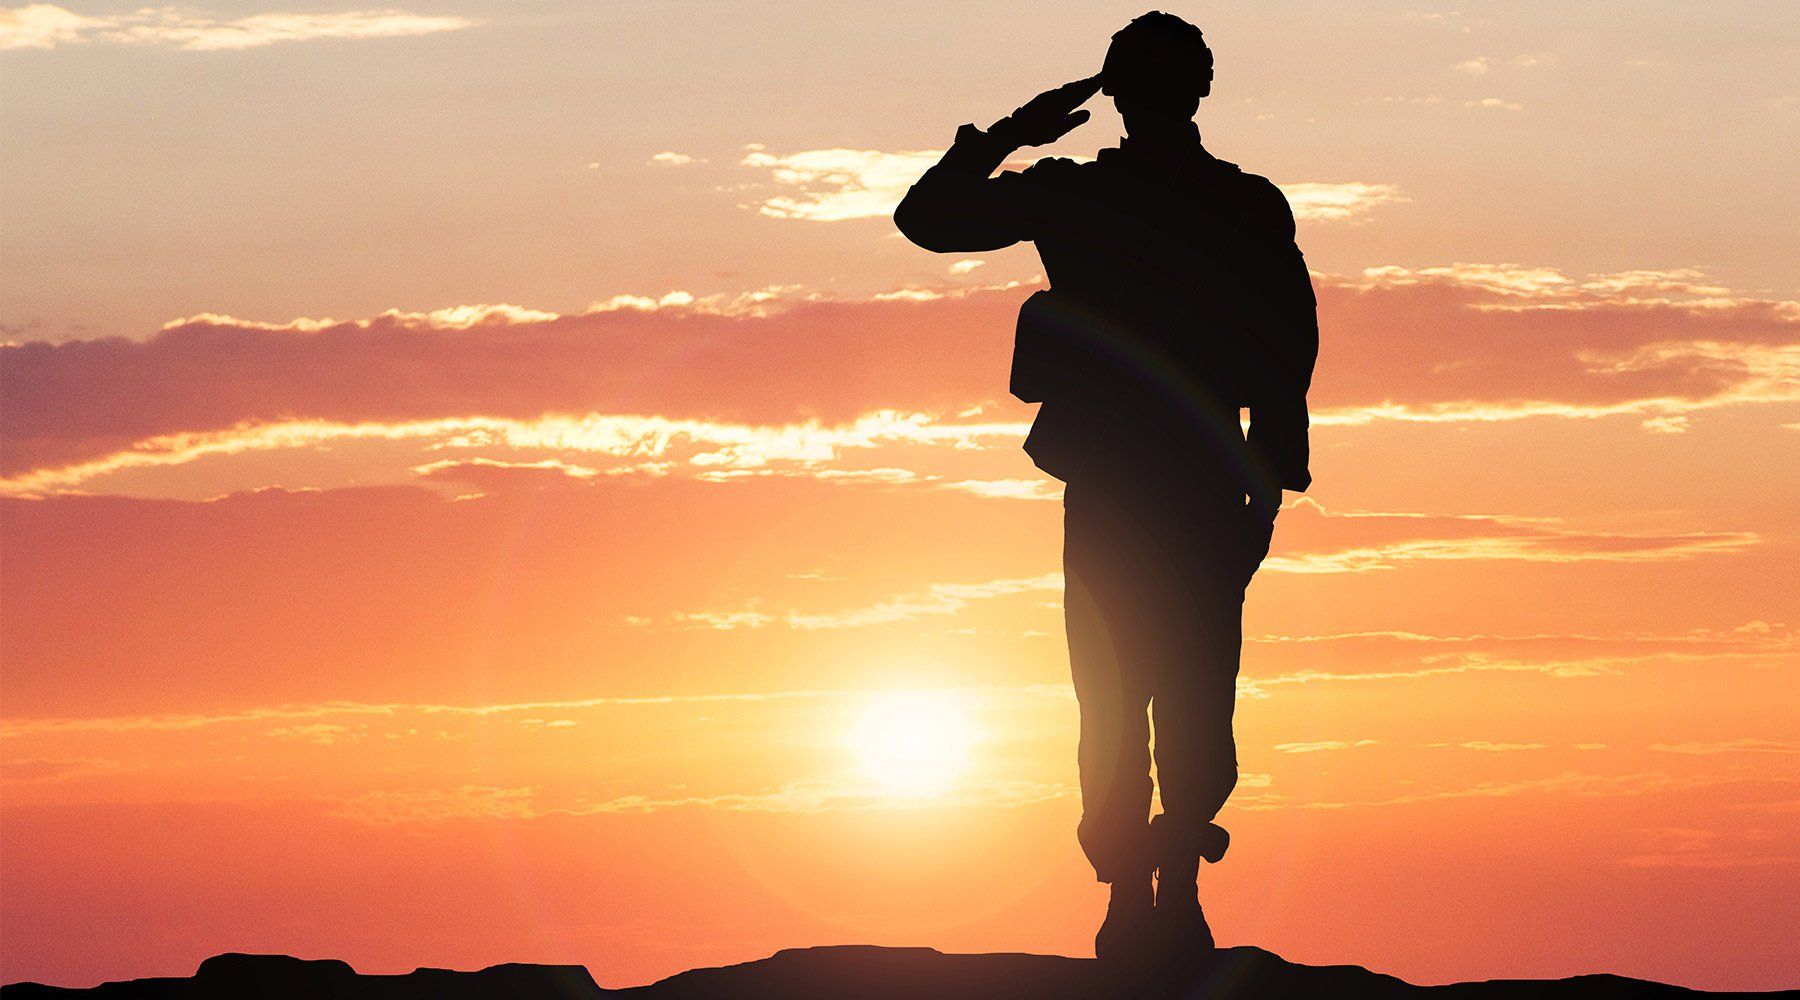 A silhouette of a soldier saluting during sunset